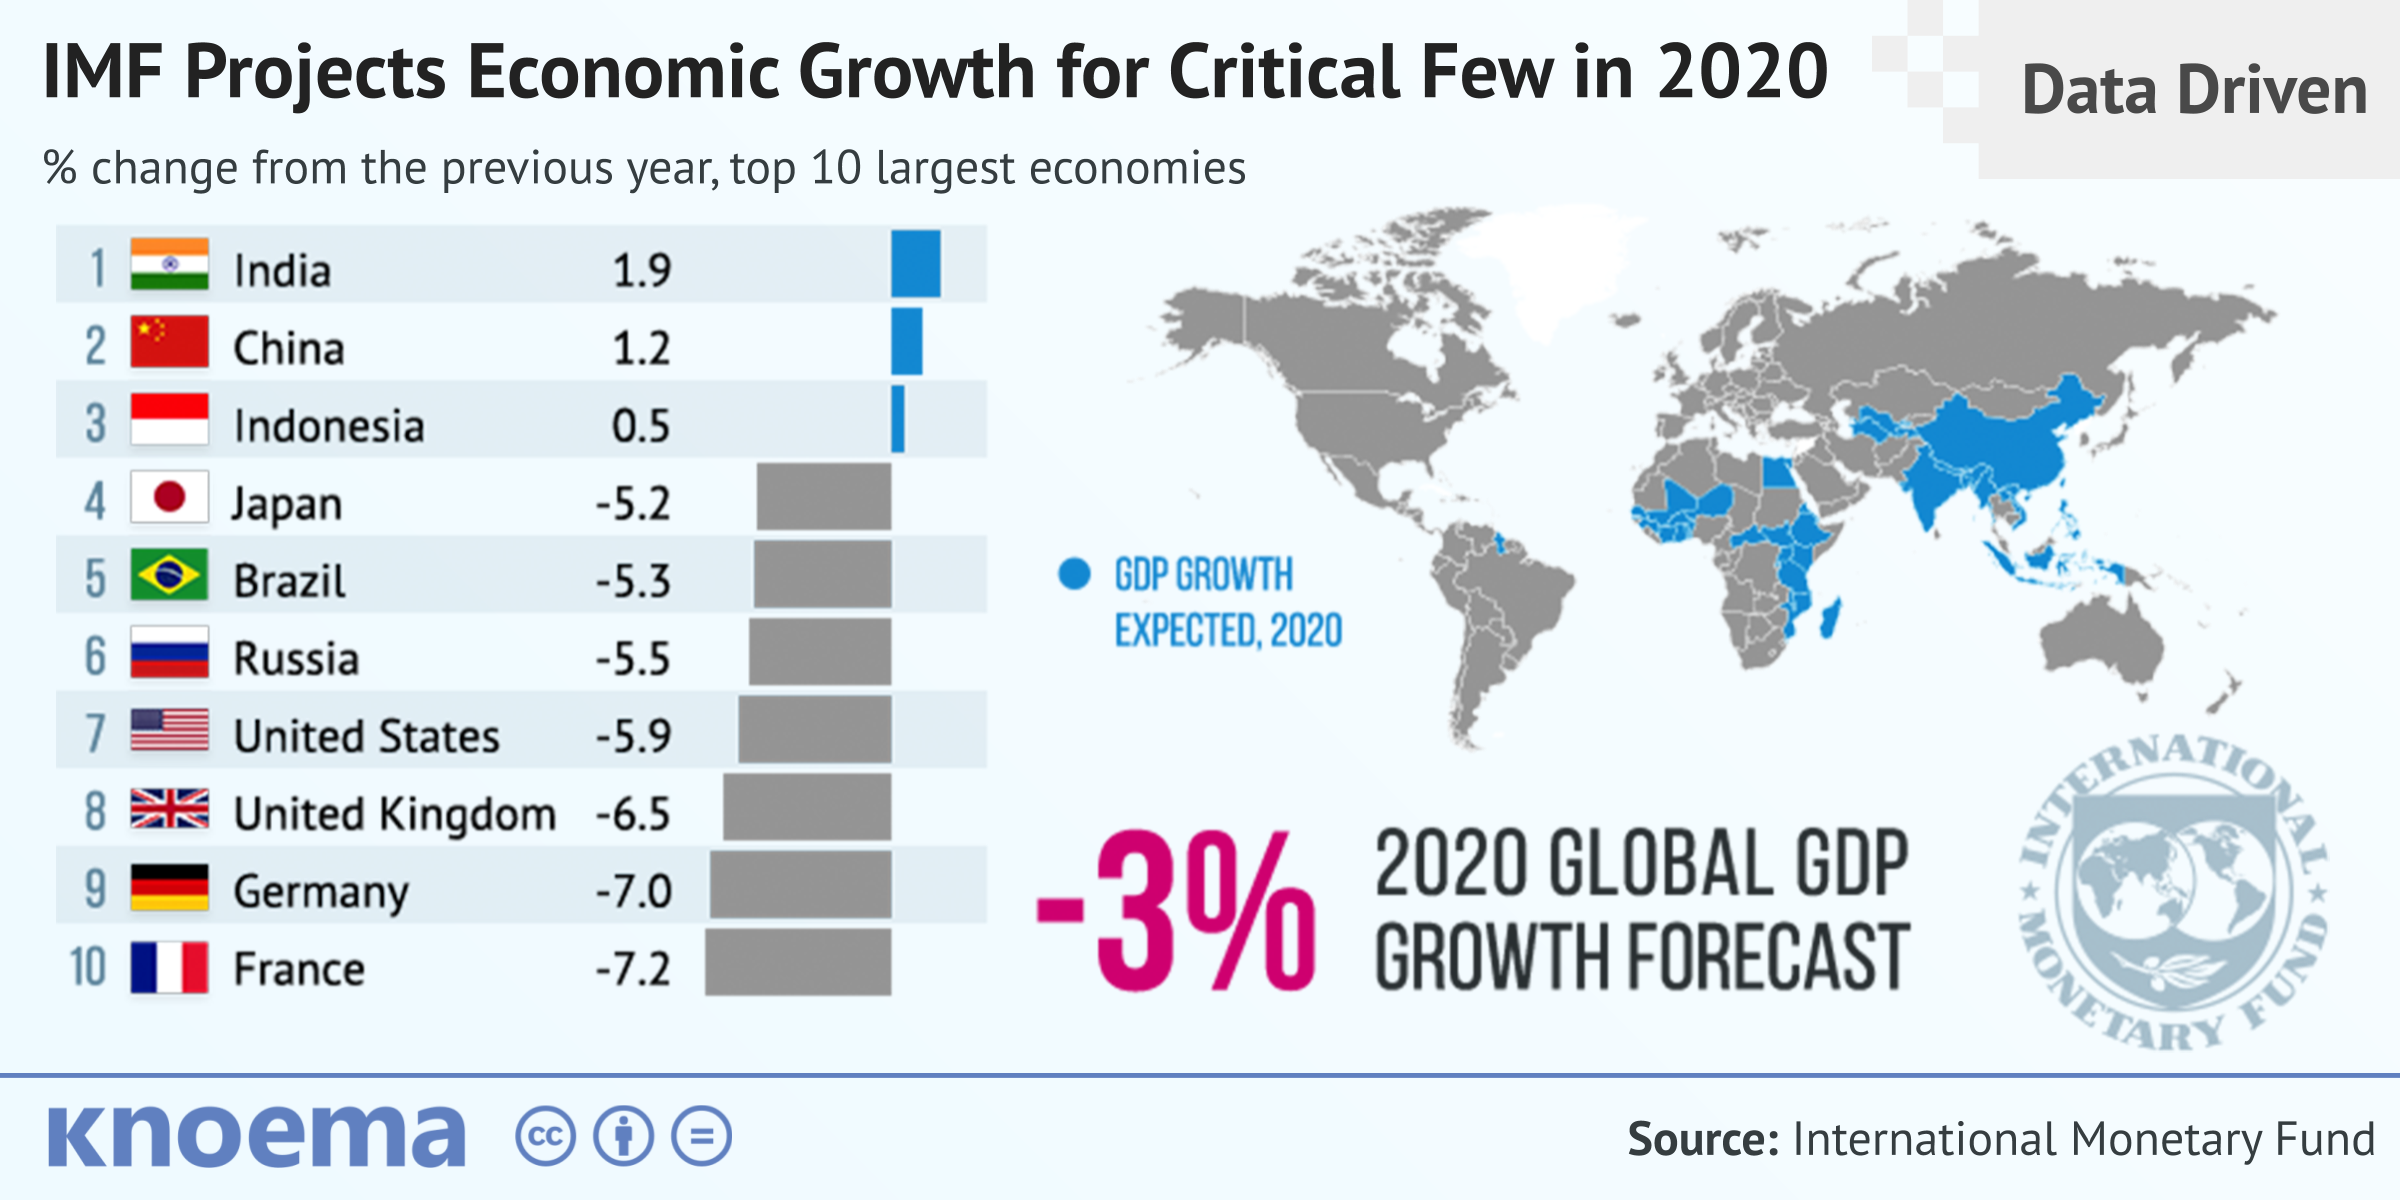 How Deep an Economic Decline Can the World Expect in 2020? - knoema.com